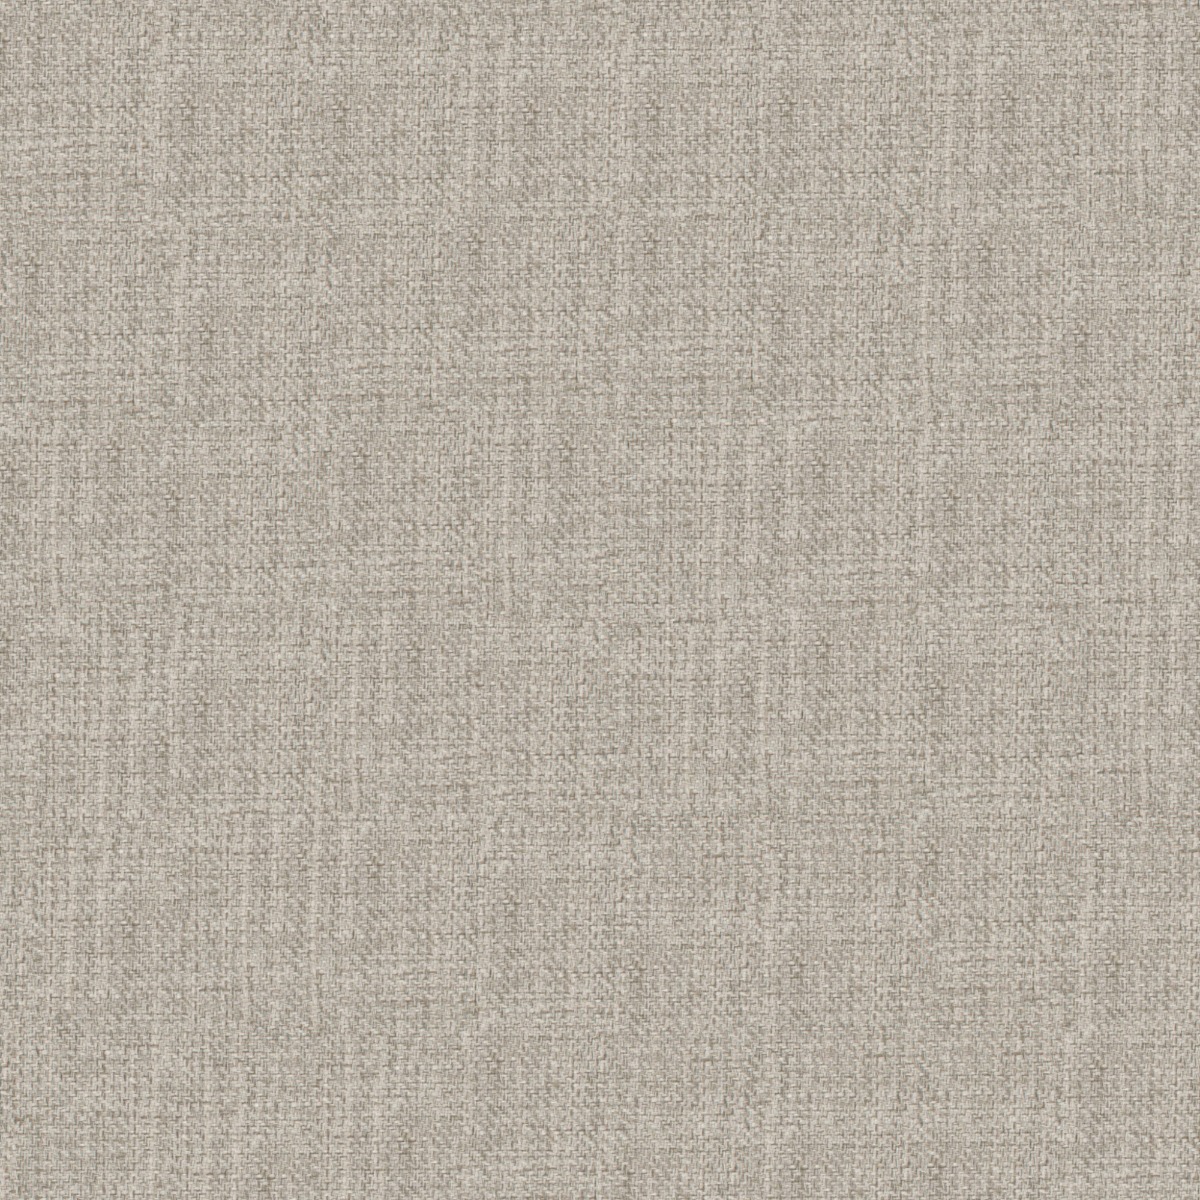 A seamless fabric texture with plain natural texture units arranged in a None pattern